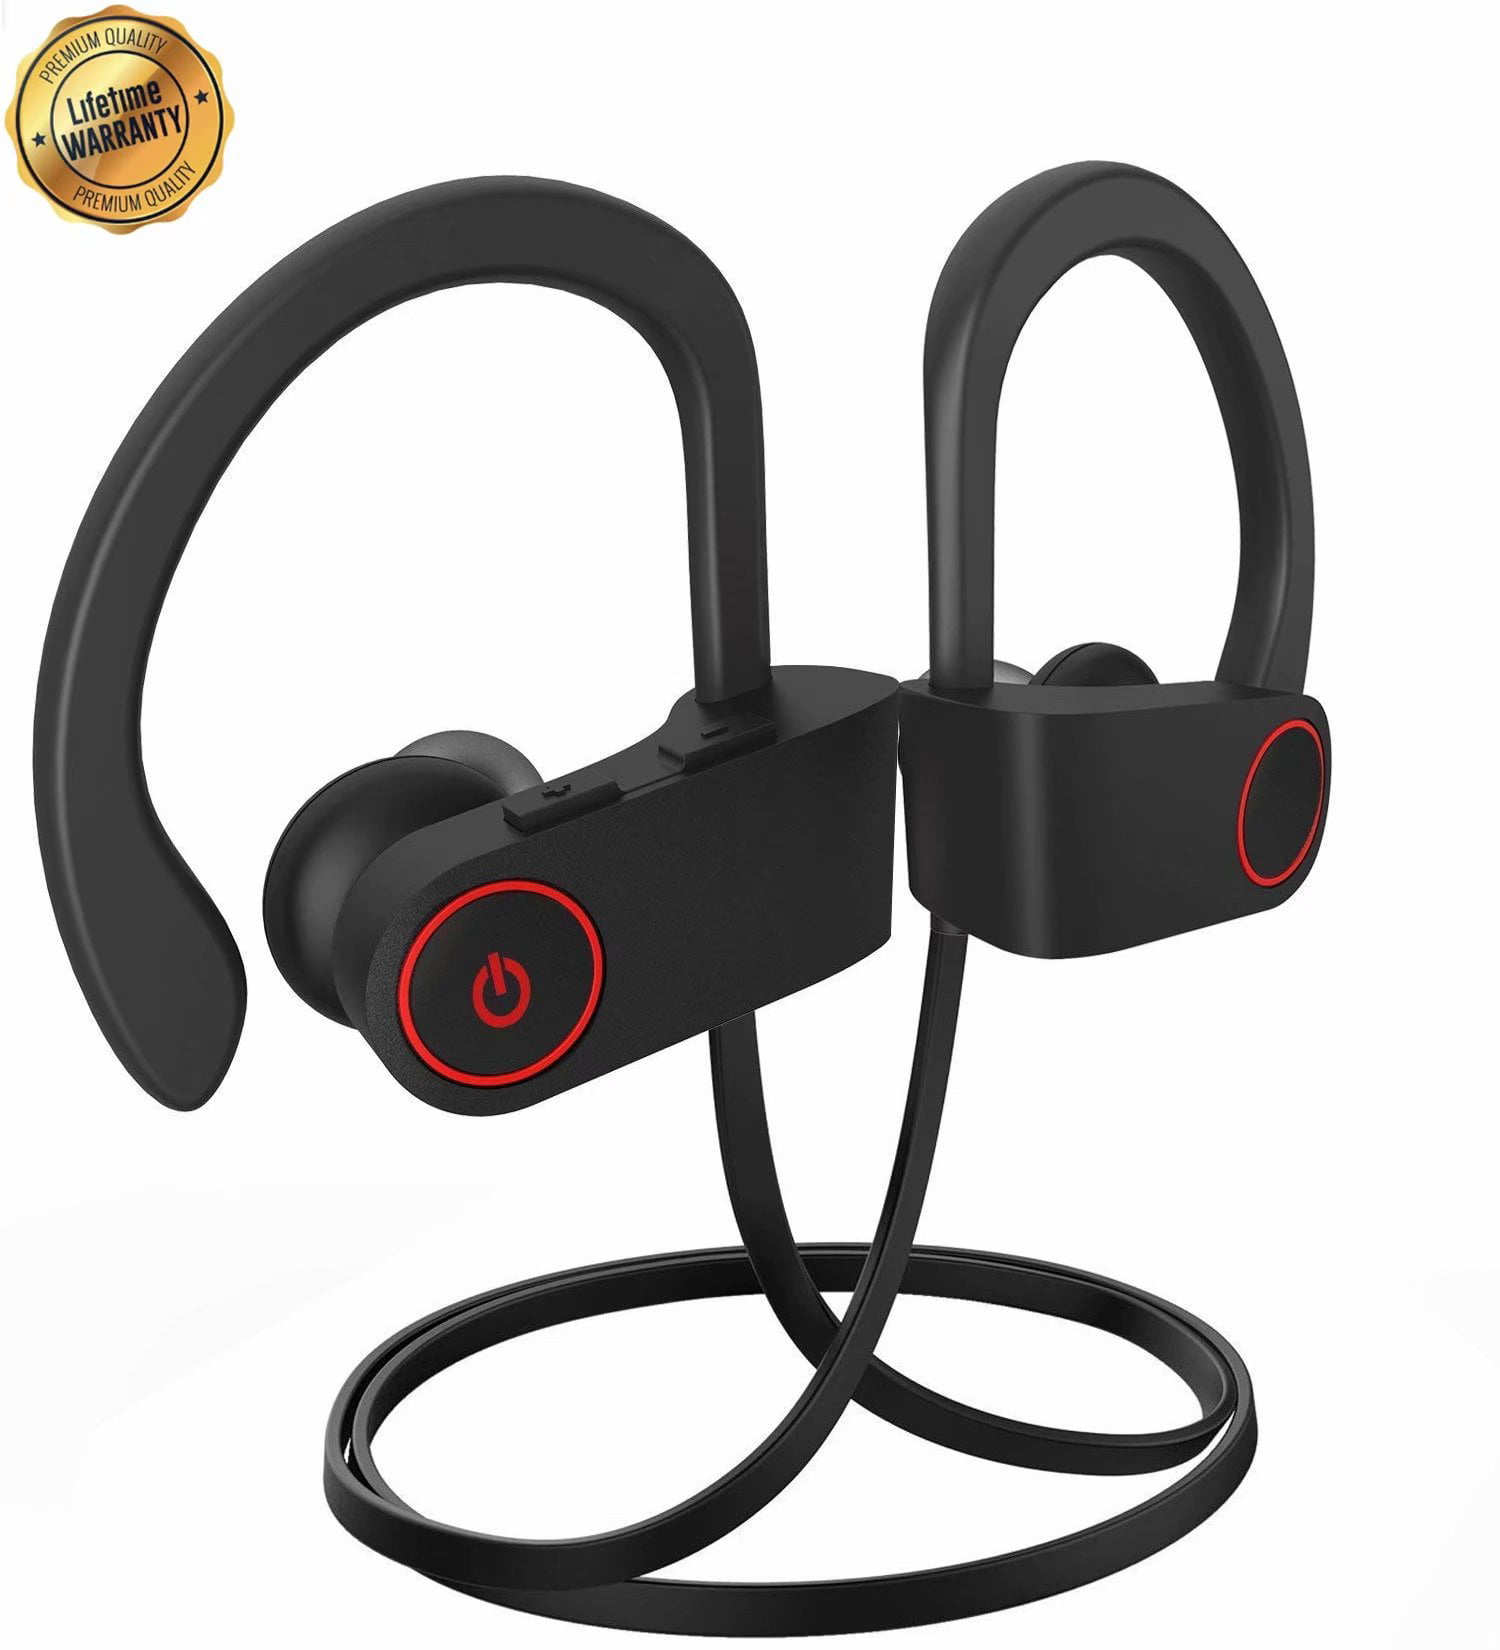 Noise-Canceling Work Out Easy Pairing Gym Bluetooth 5.0 Headphones Wireless Earbuds Bluetooth Headphones,Secure Fit Stereo Calls Sweatproof for Sports